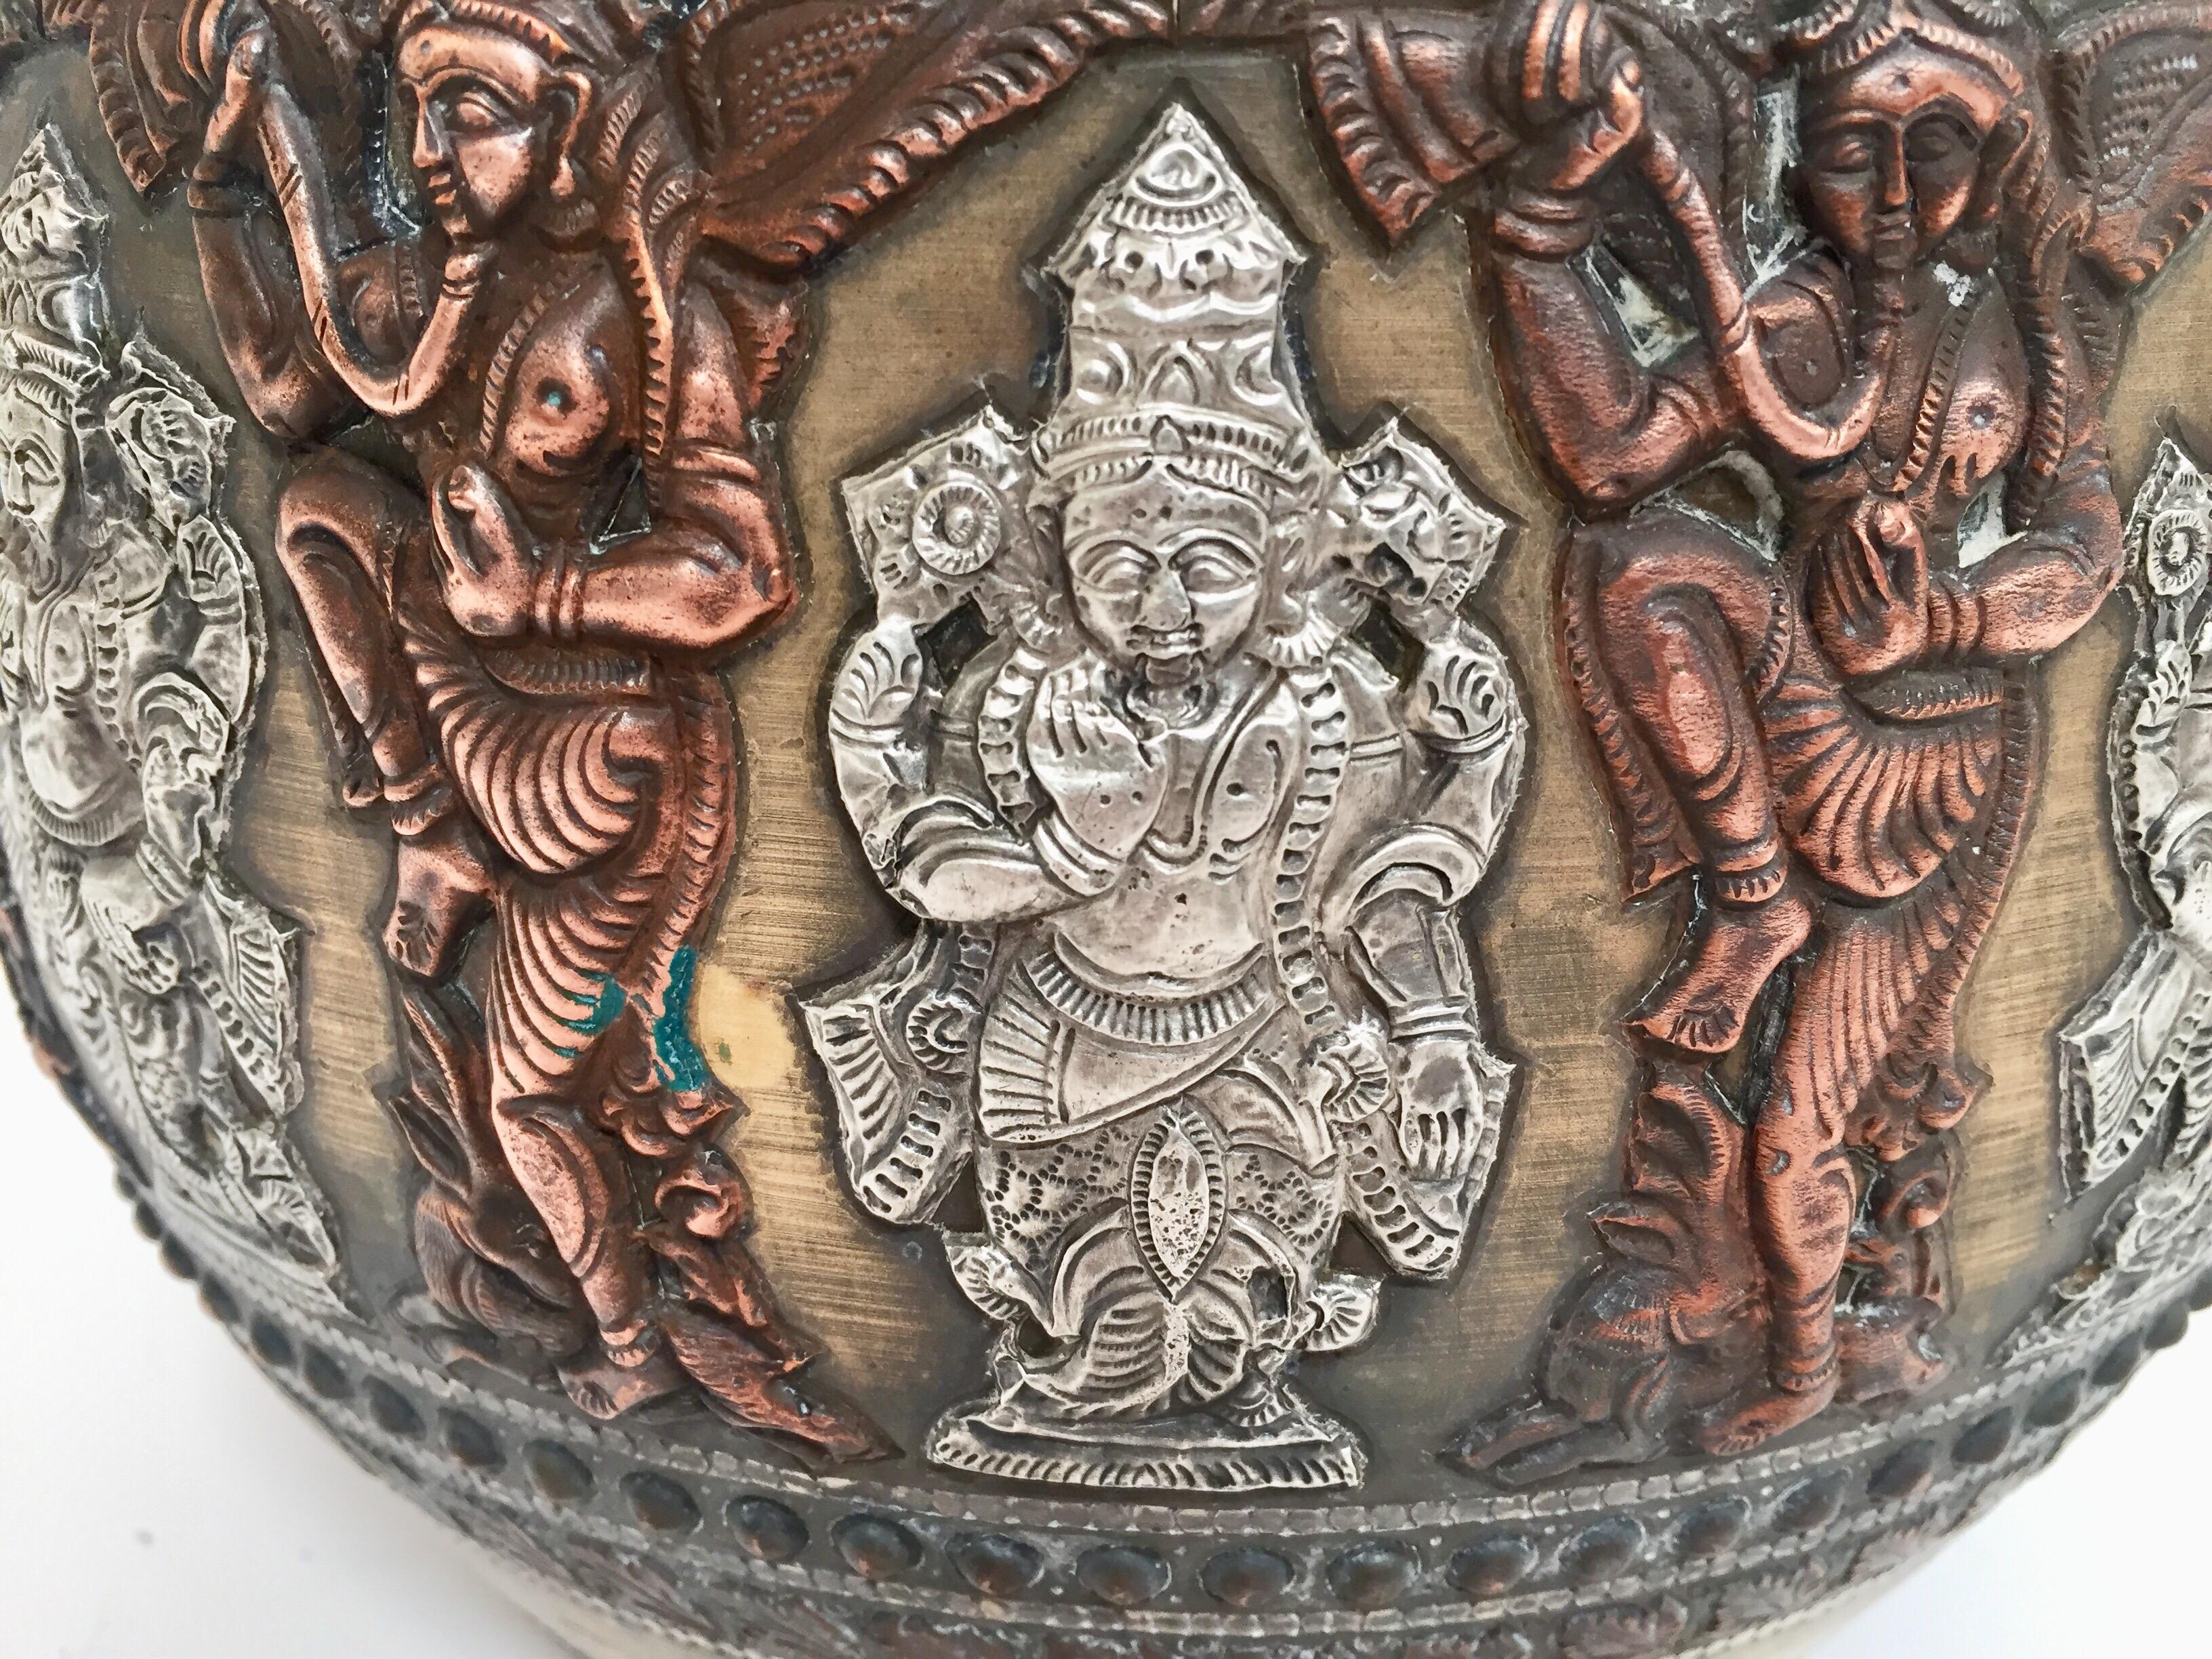 Large Burmes Brass, Copper, Silver Inlaid Ceremonial Bowl with Avatars of Vishnu For Sale 6